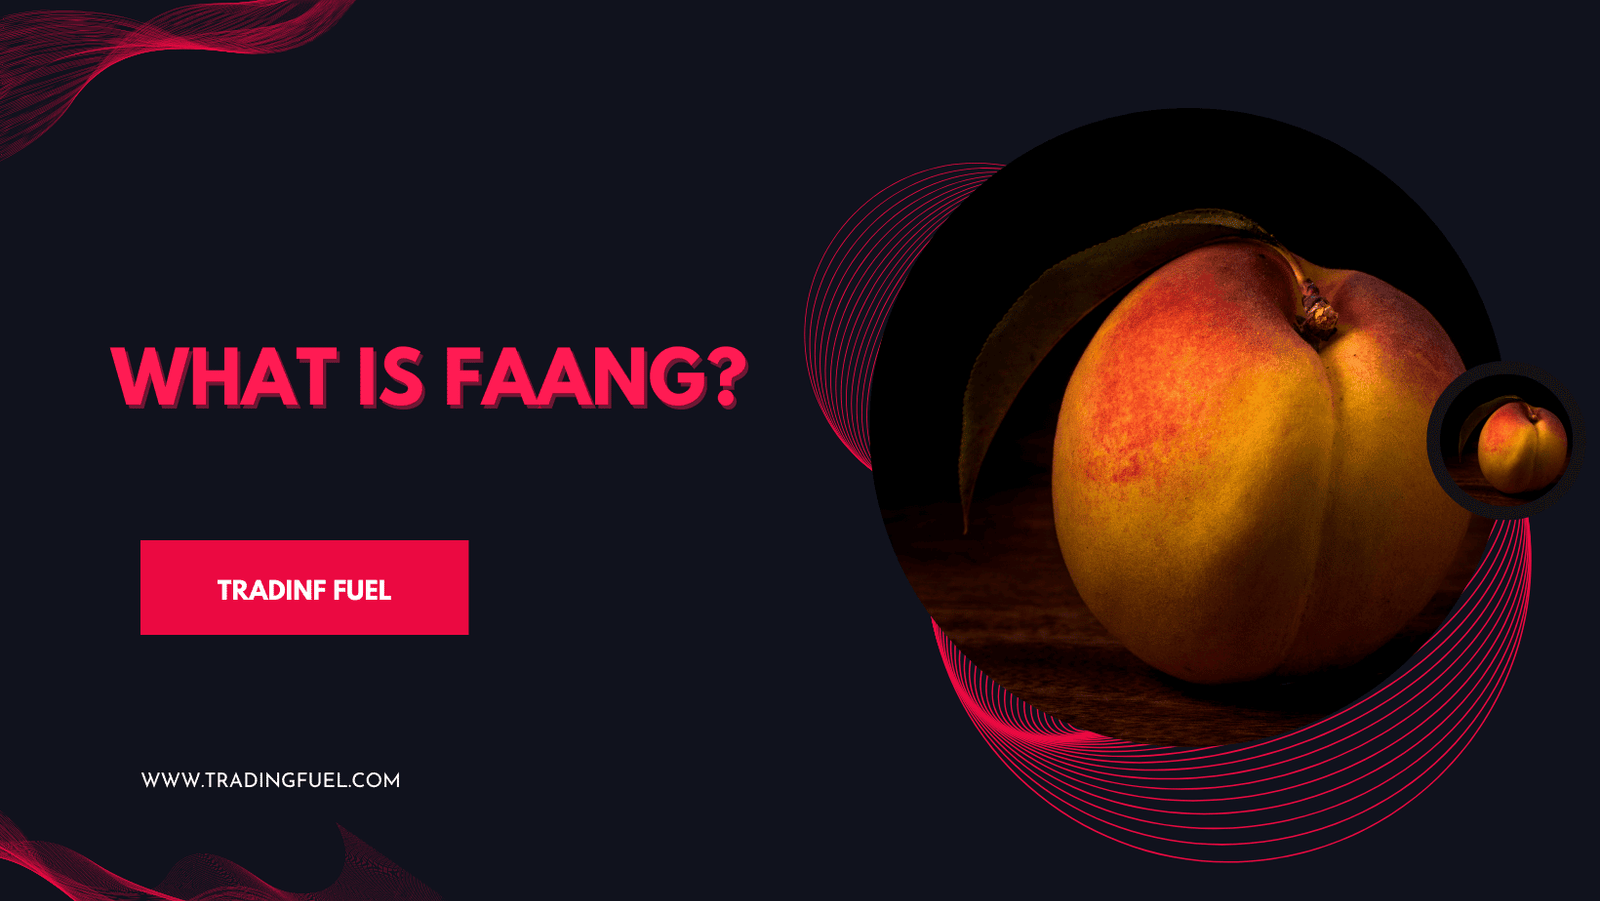 What is FAANG?